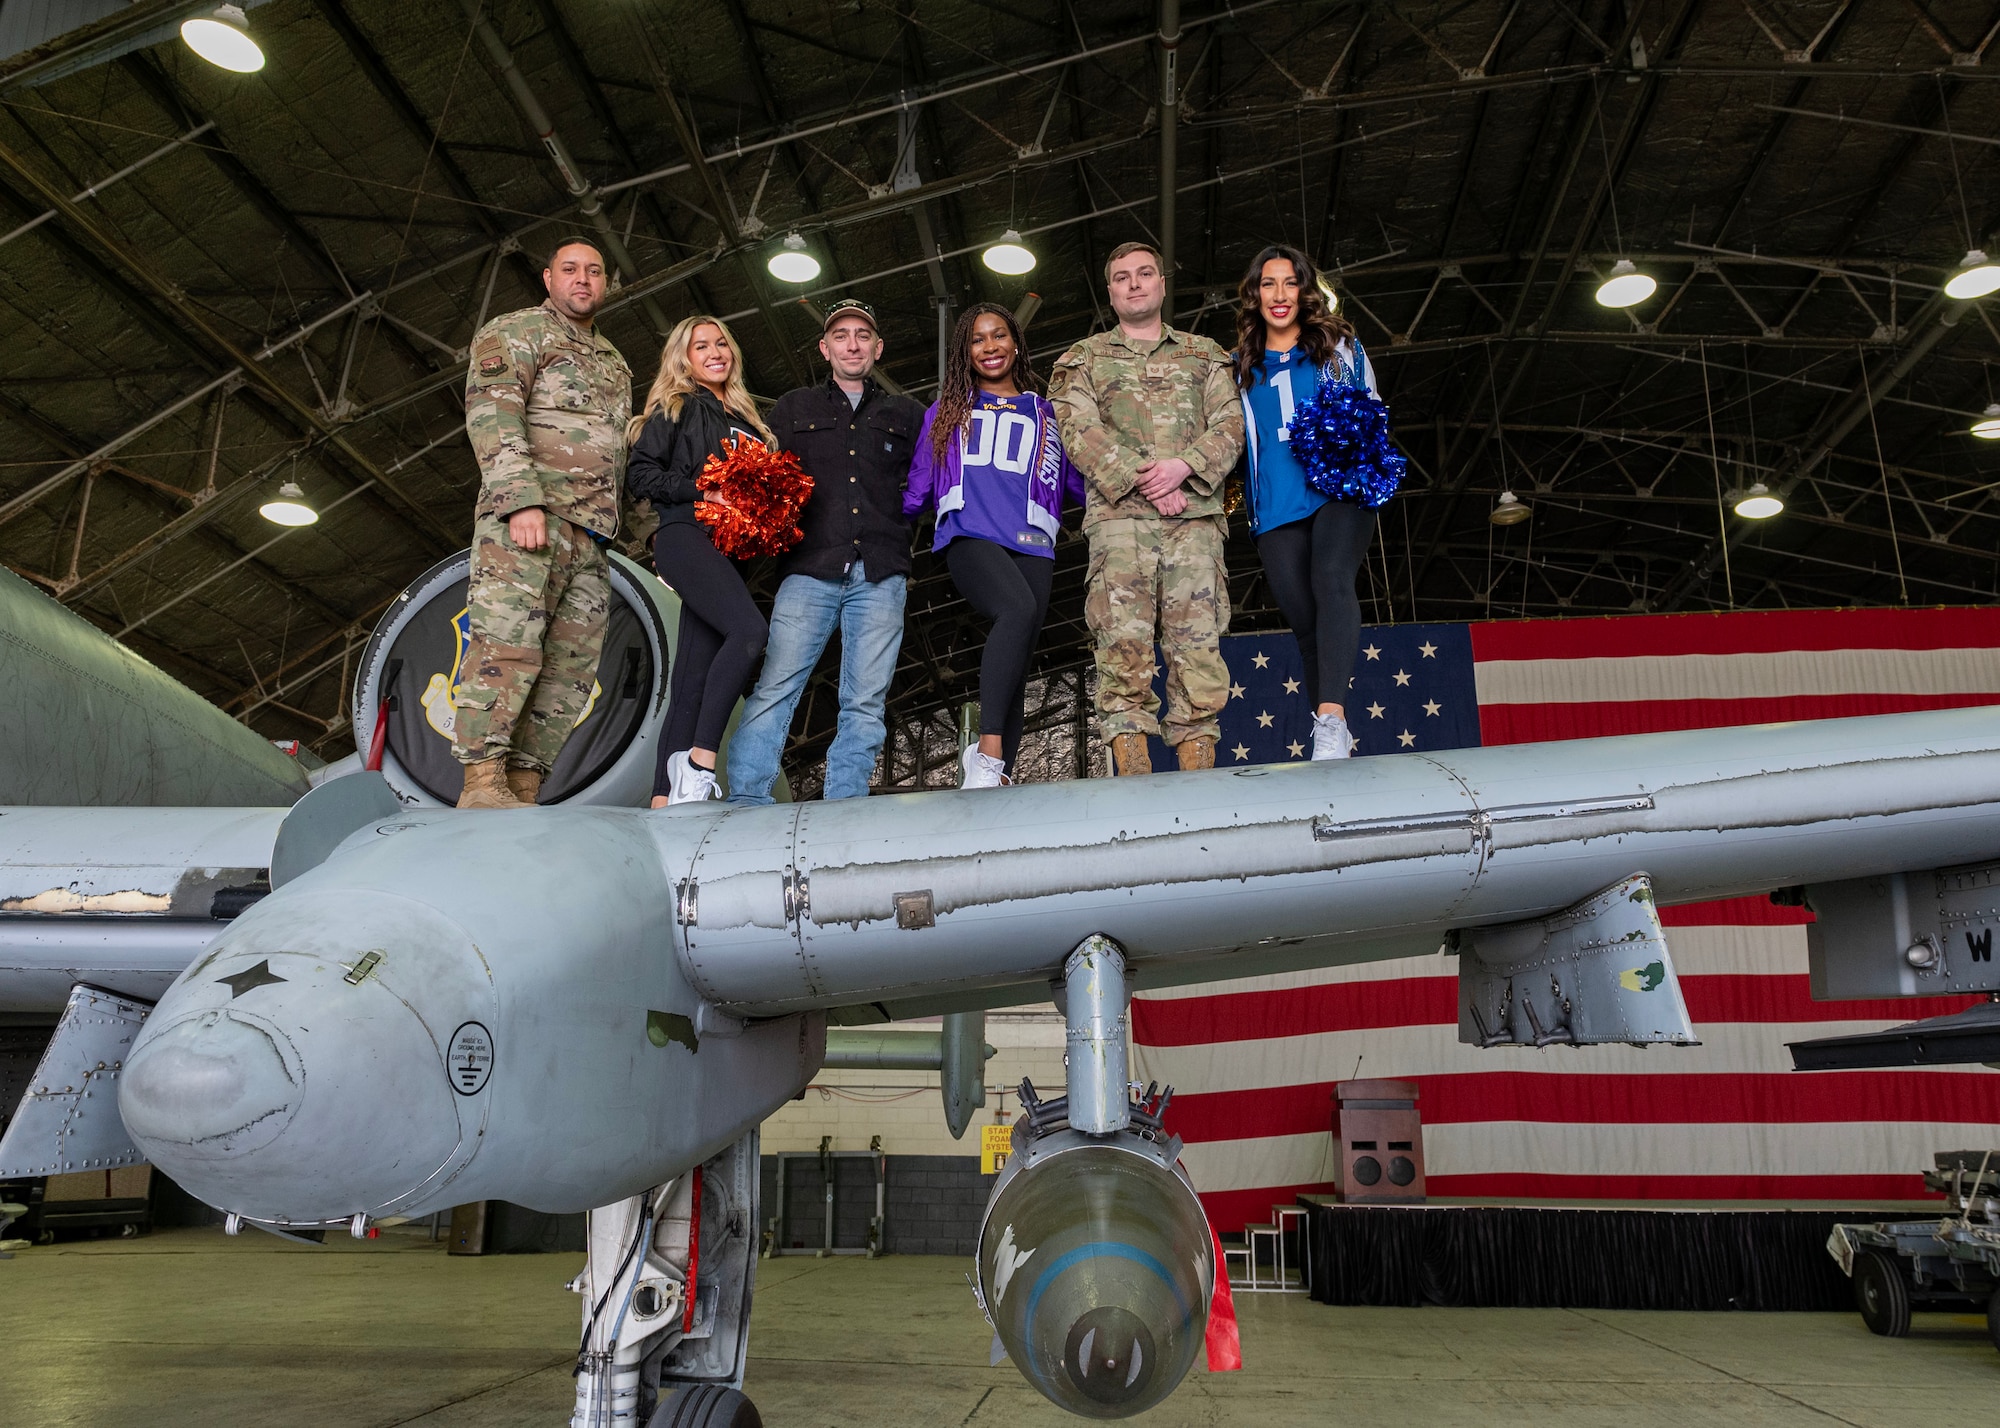 U.S. Airmen assigned to the 51st Maintenance Group take a group photo with NFL cheerleaders during the Pro Blitz 2024 unit visit at Osan Air Base, Republic of Korea, Feb. 10, 2024. The cheerleaders' visit was part of the NFL tour sponsored by the Armed Forces Entertainment. (U.S. Air Force photo by Staff Sgt. Aubree Owens)